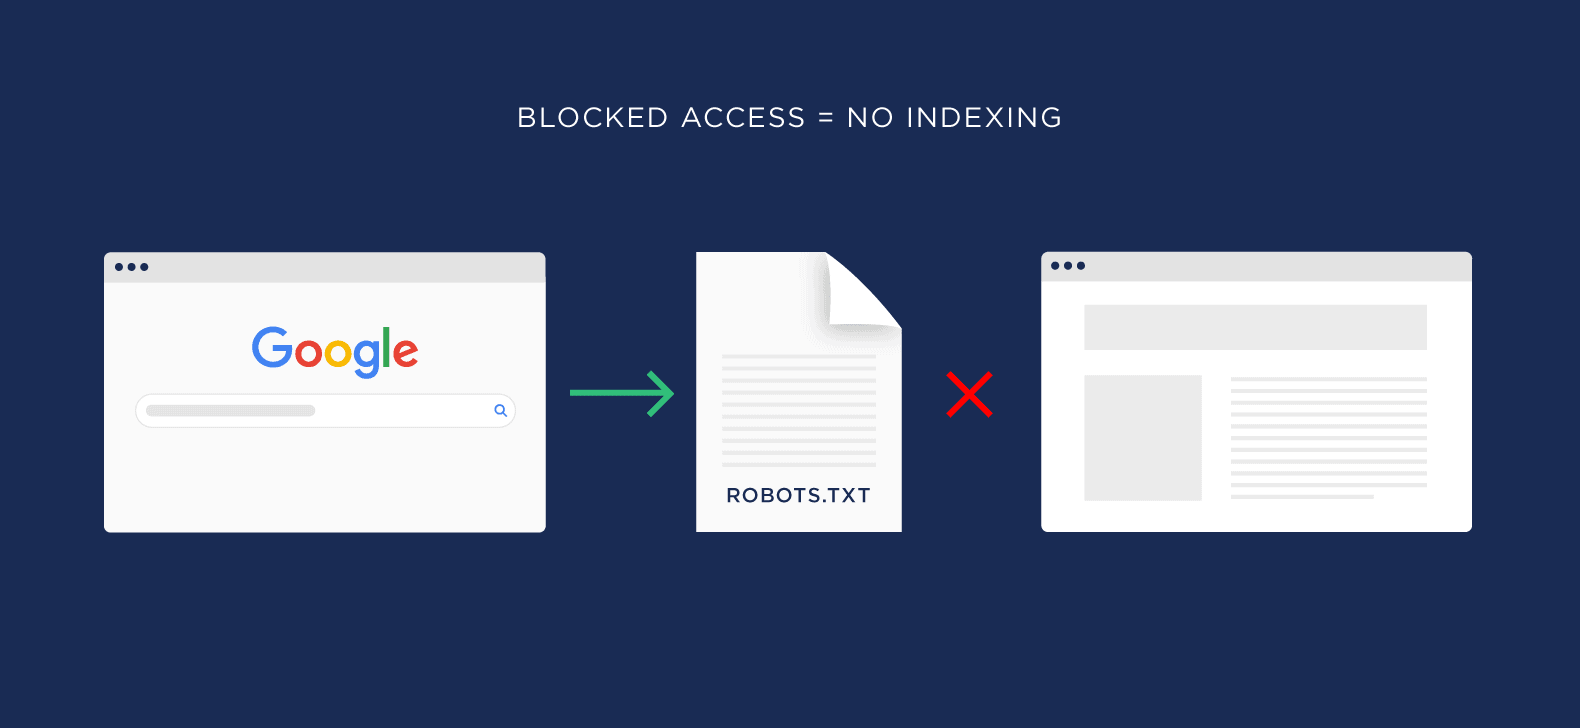 Blocked access noindexing